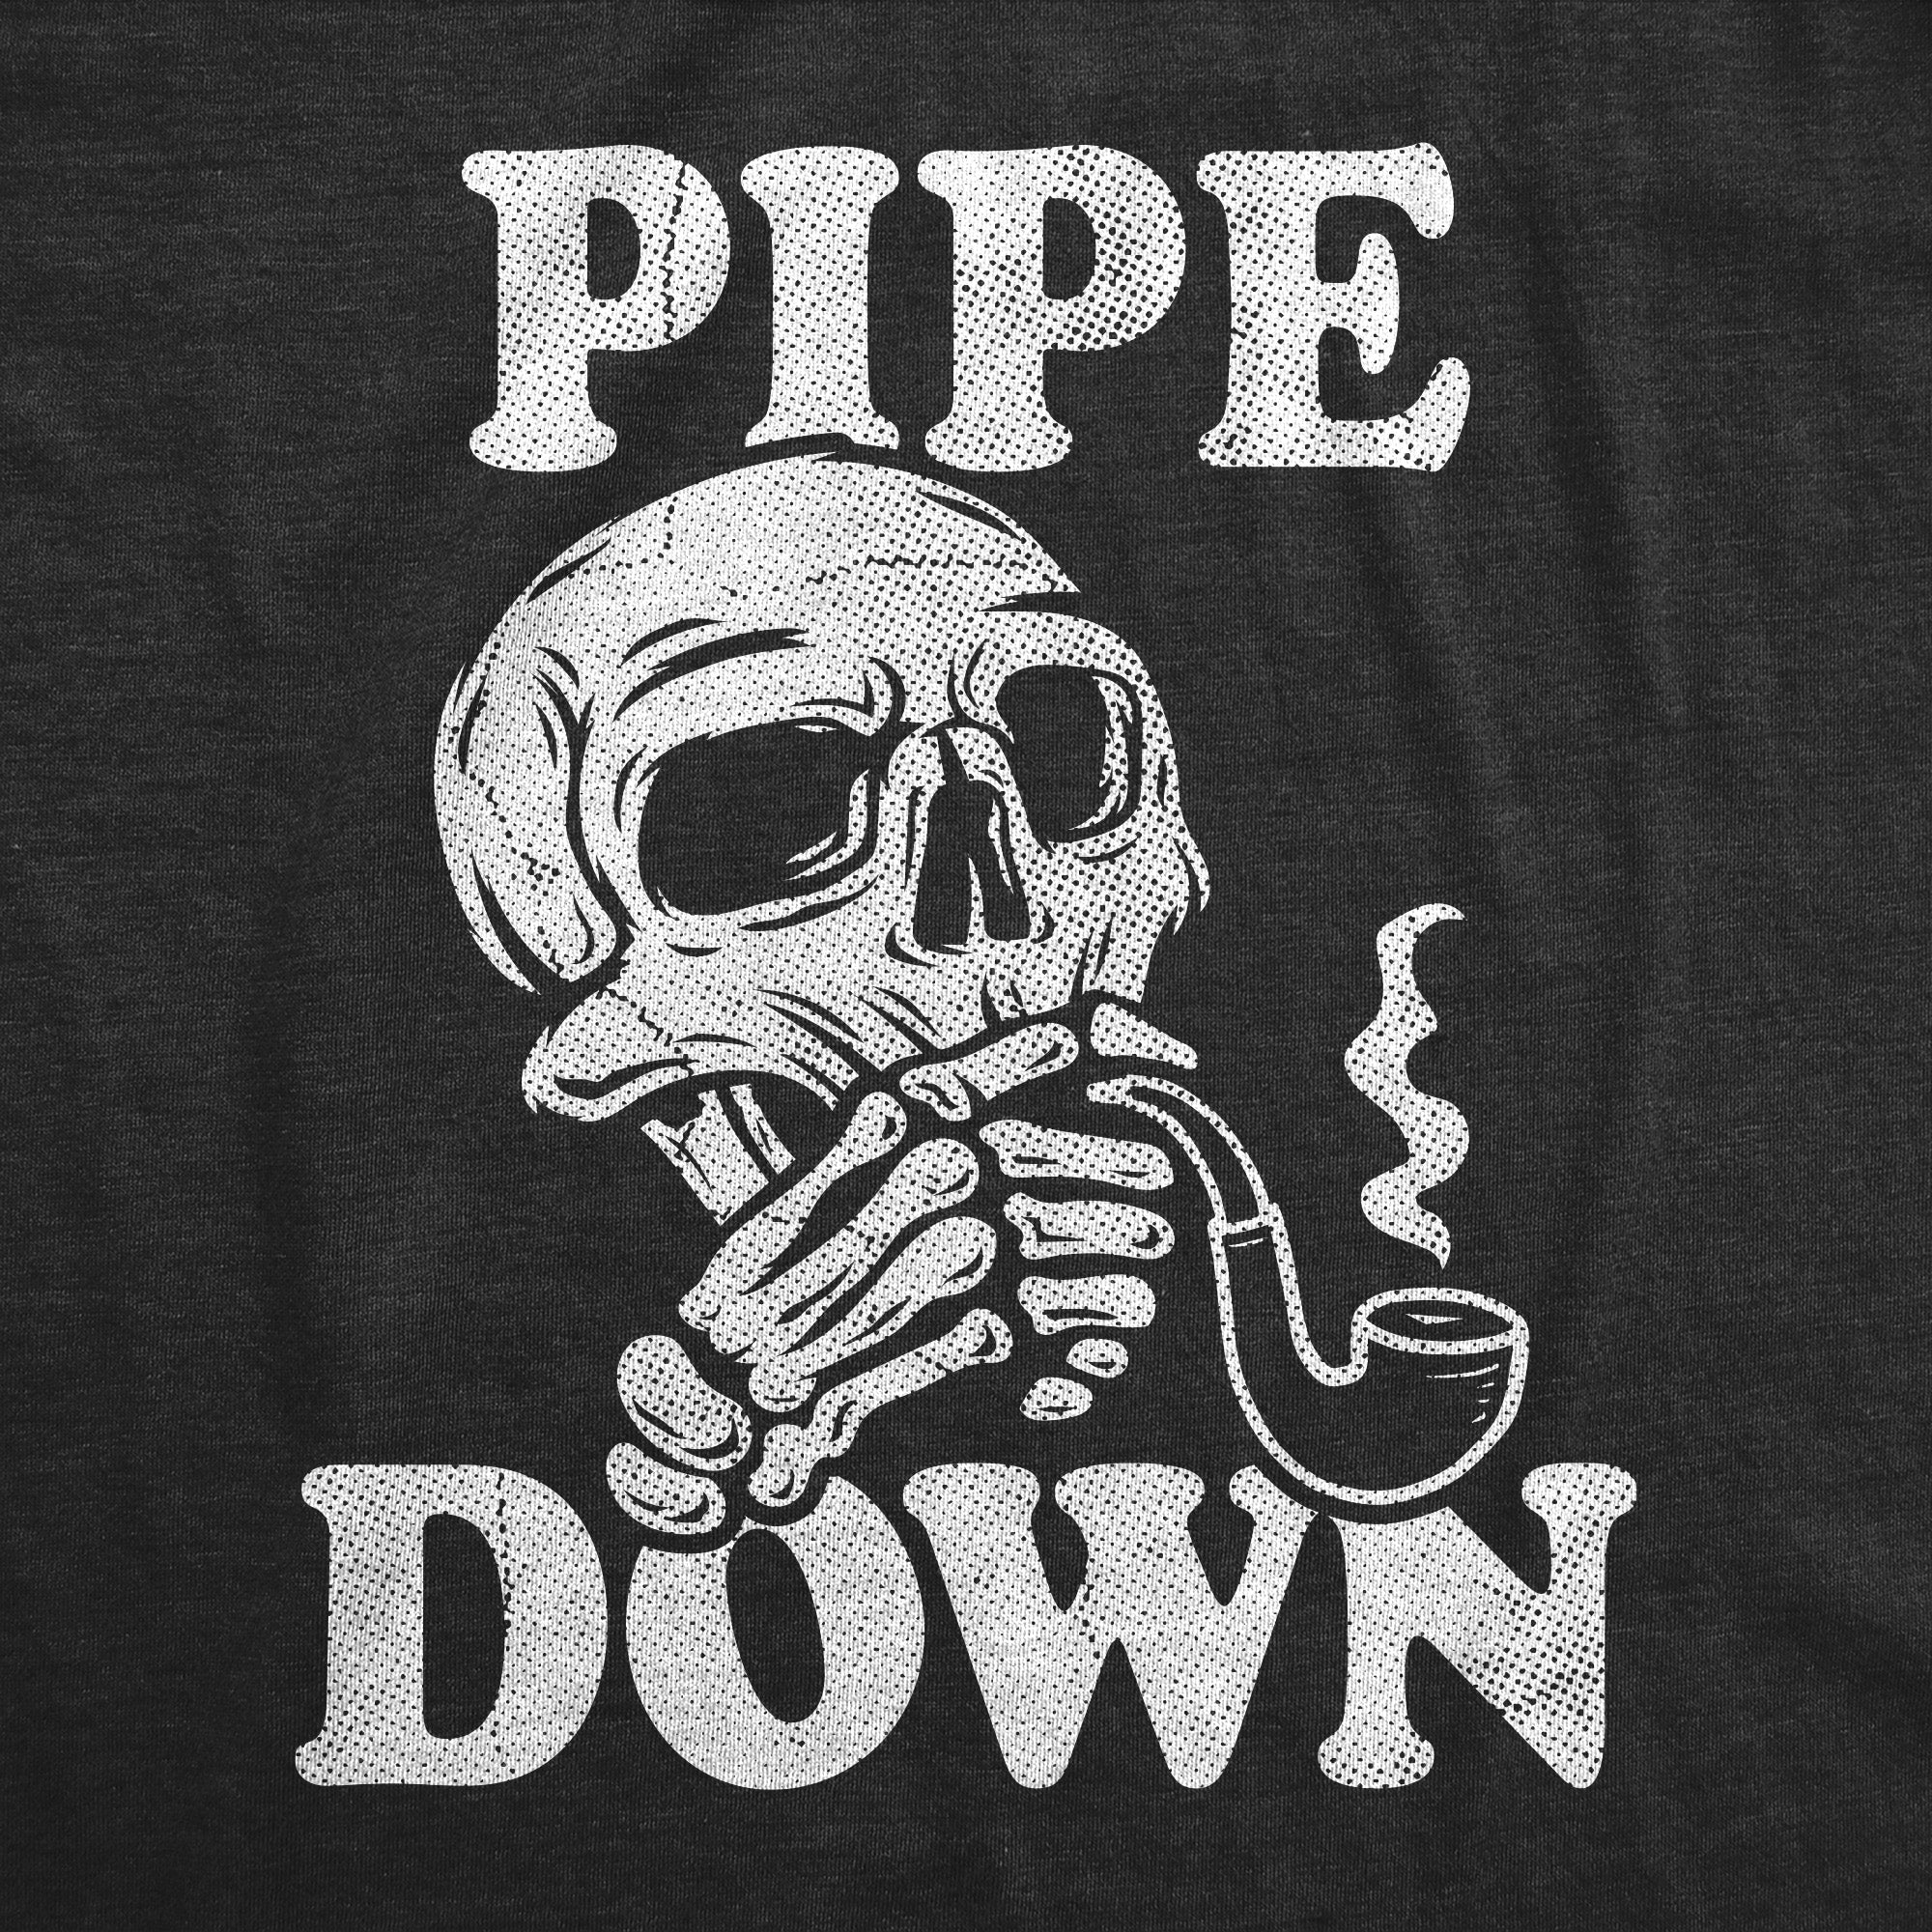 Funny Heather Black - PIPE Pipe Down Womens T Shirt Nerdy 420 Sarcastic Tee